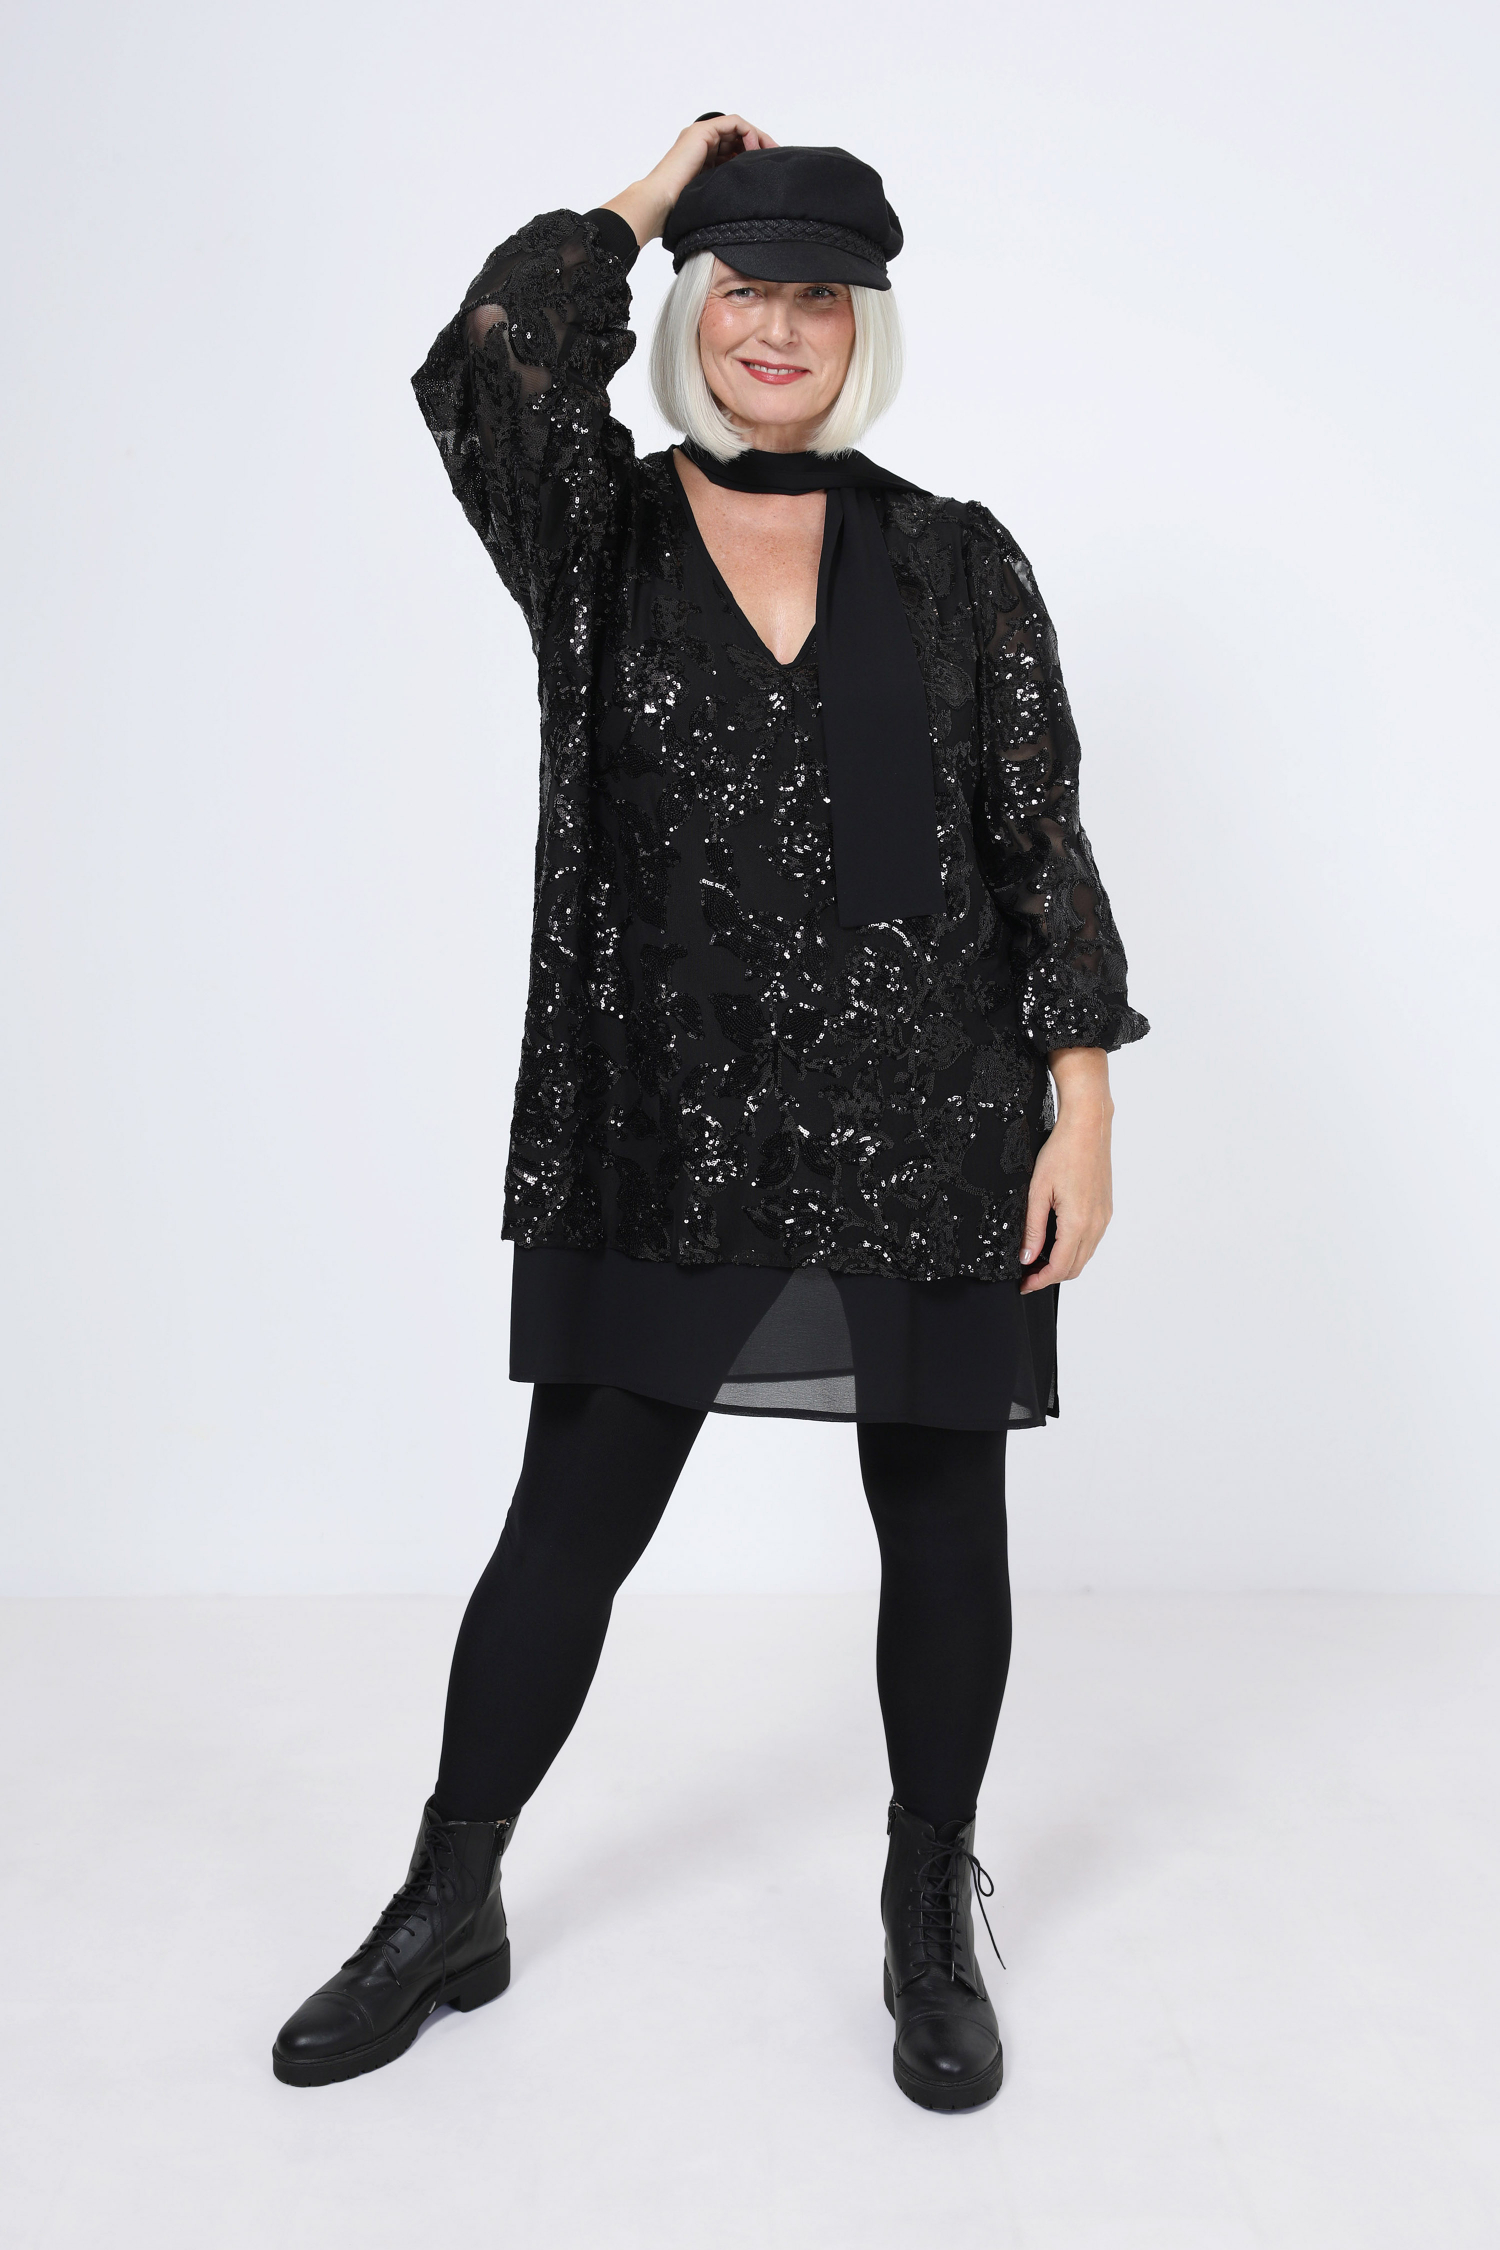 Tunic in veil and sequined lace overlay